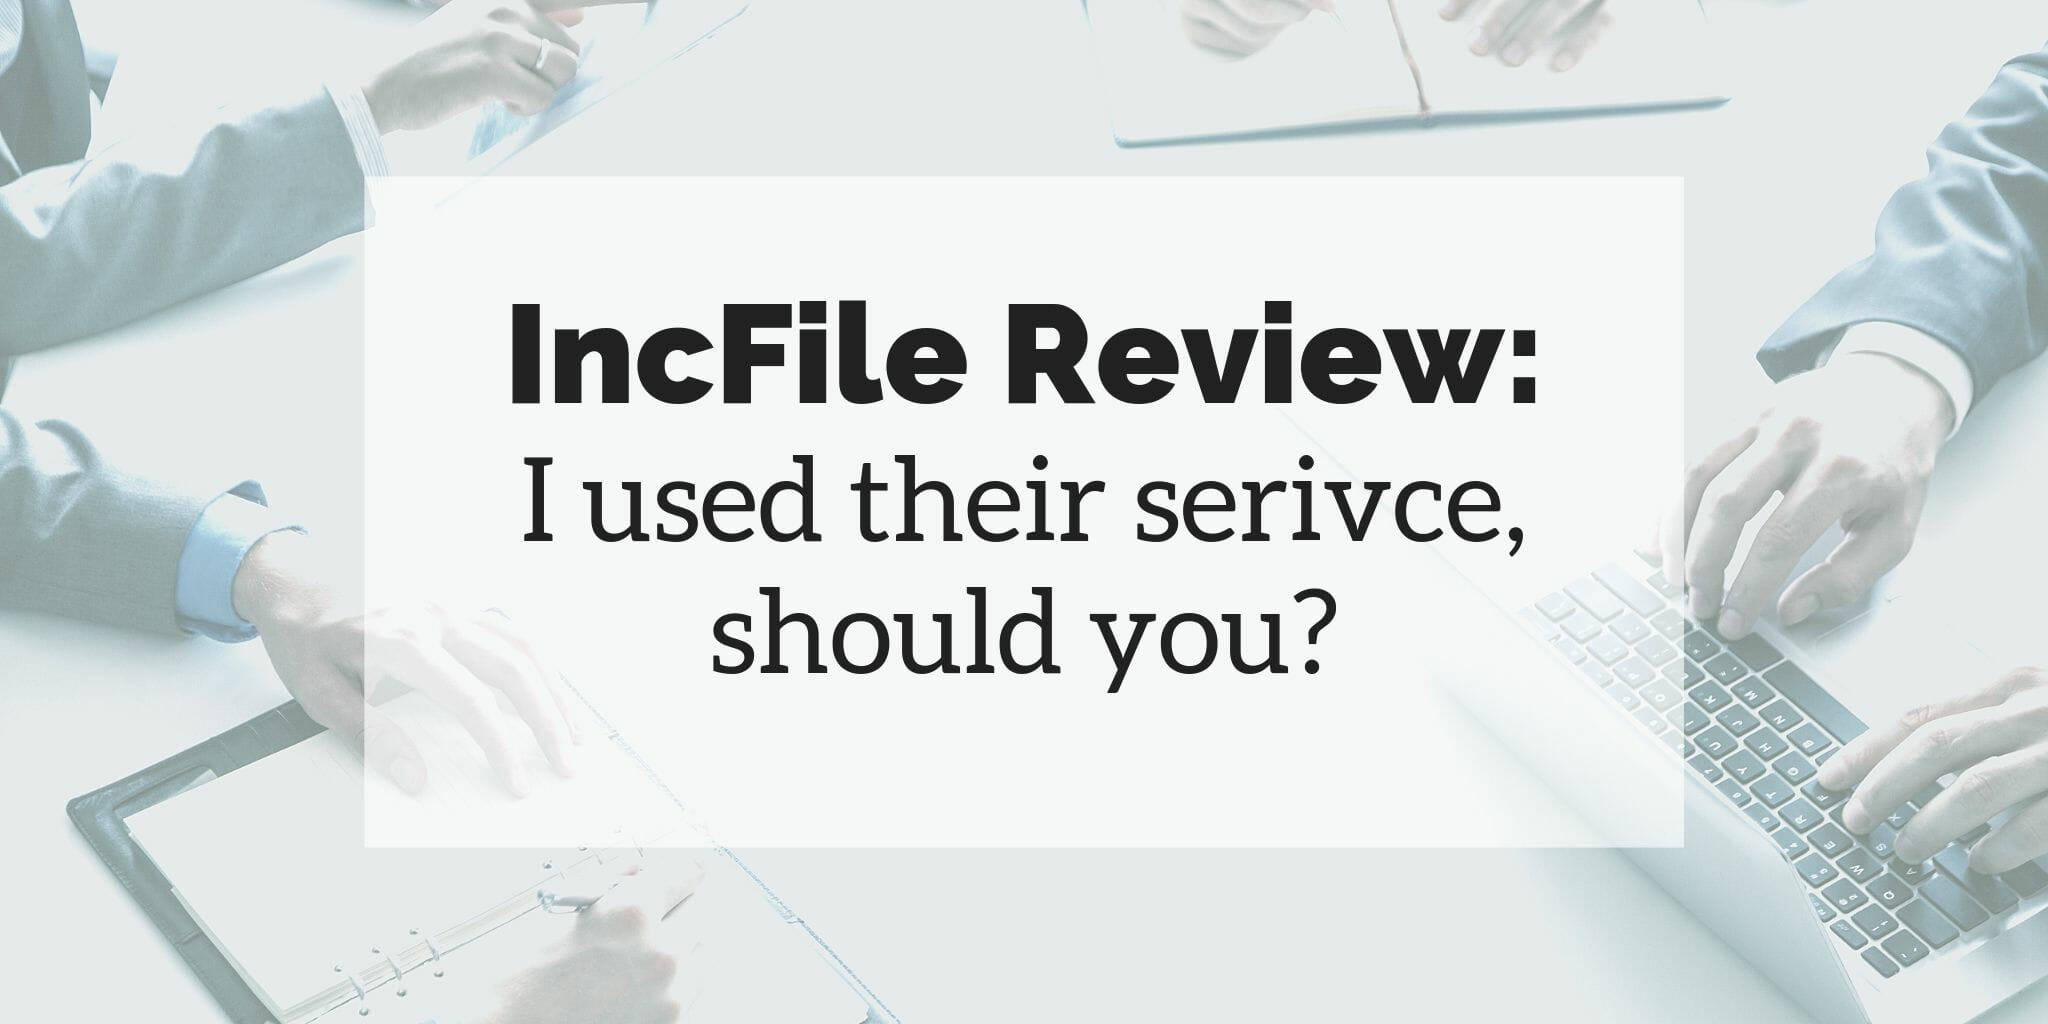 Photo of business people with text "IncFile Review" superimposed over the photo.